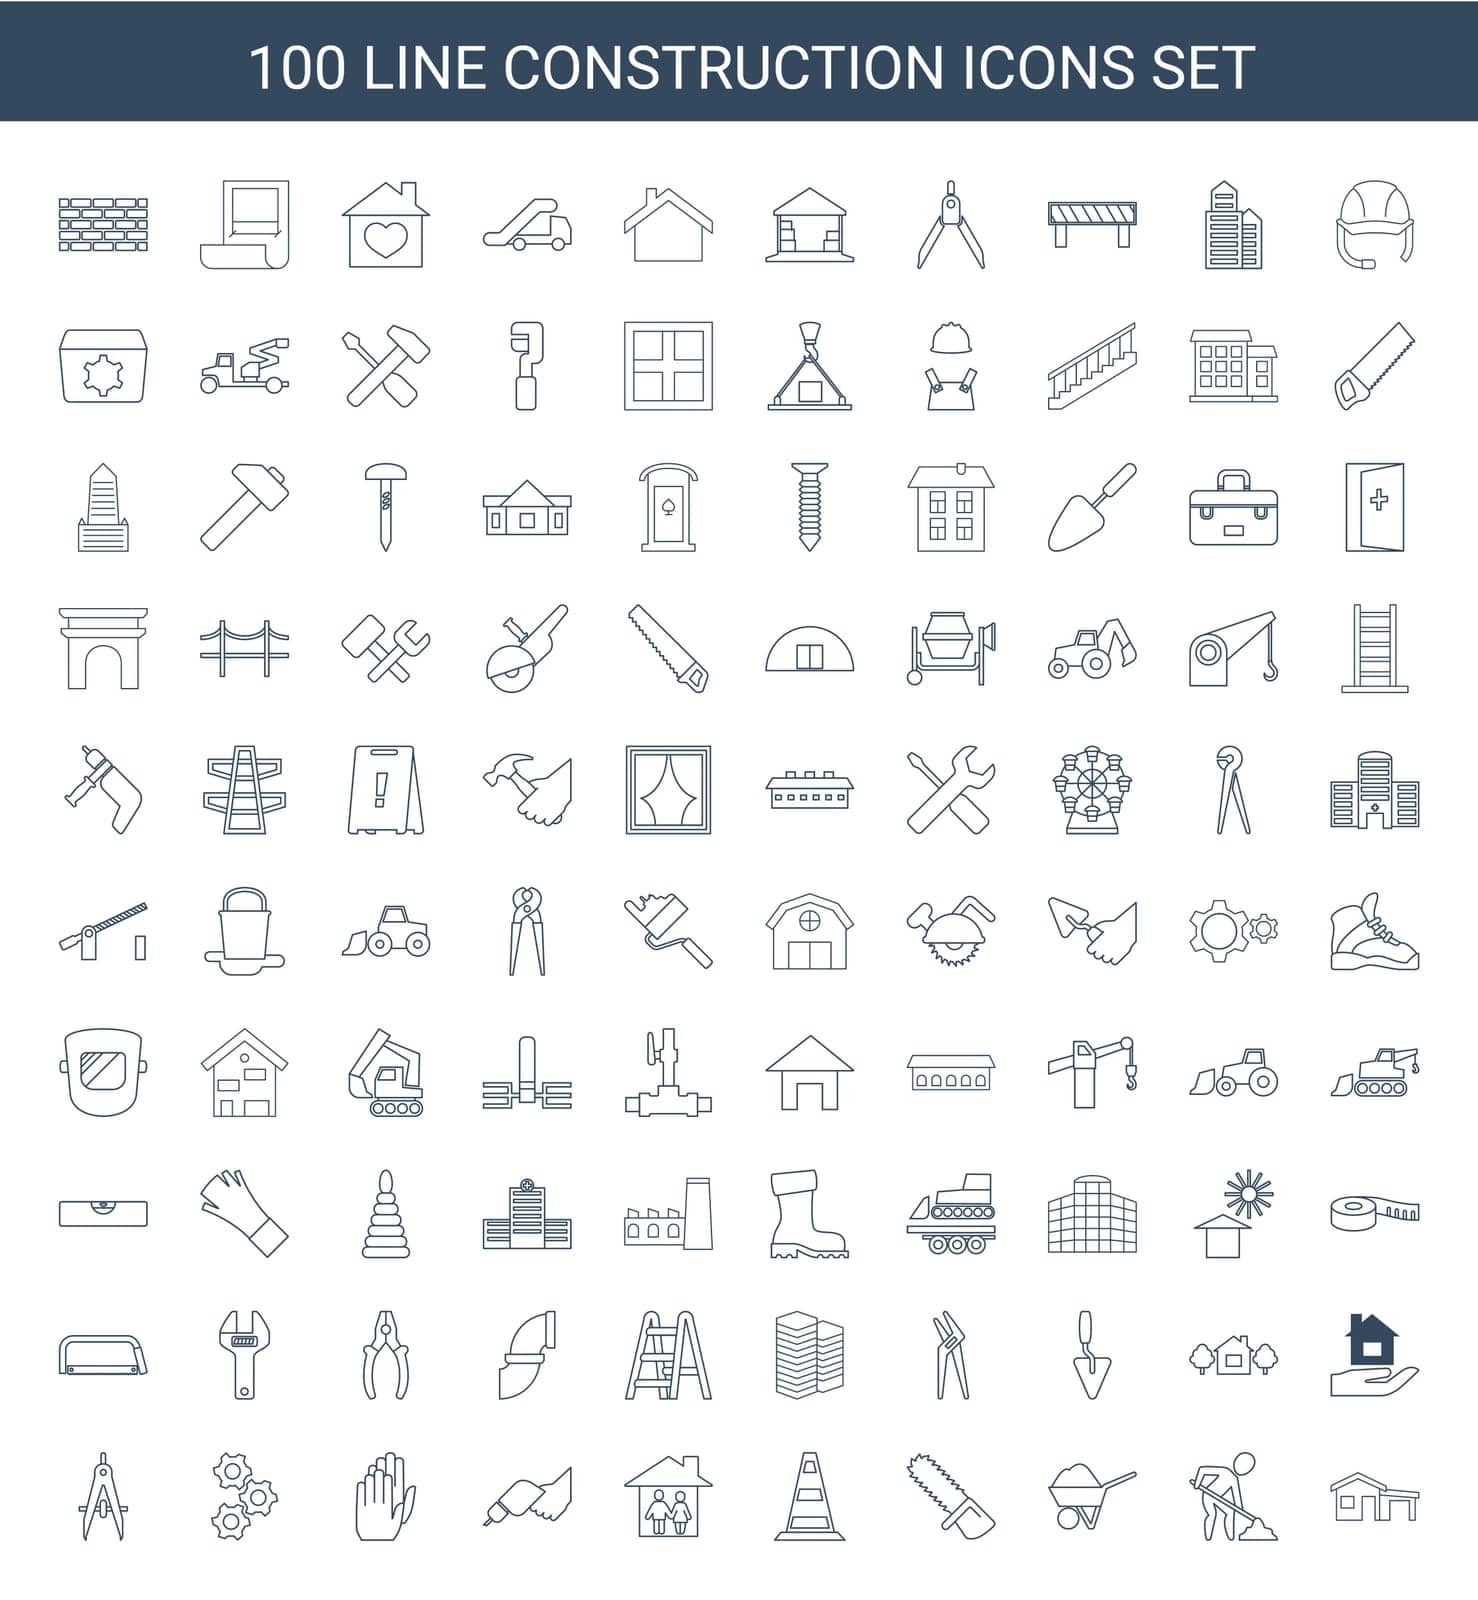 gun,measuring,glove,icon,house,sun,cone,building,gloves,barrier,tape,chainsaw,and,pliers,construction,pipe,vector,man,hacksaw,cargo,hospital,boot,crane,factory,trowel,set,business,nail,tree,centre,digging,home,wrench,ladder,compass,pyramid,family,under,care,gear